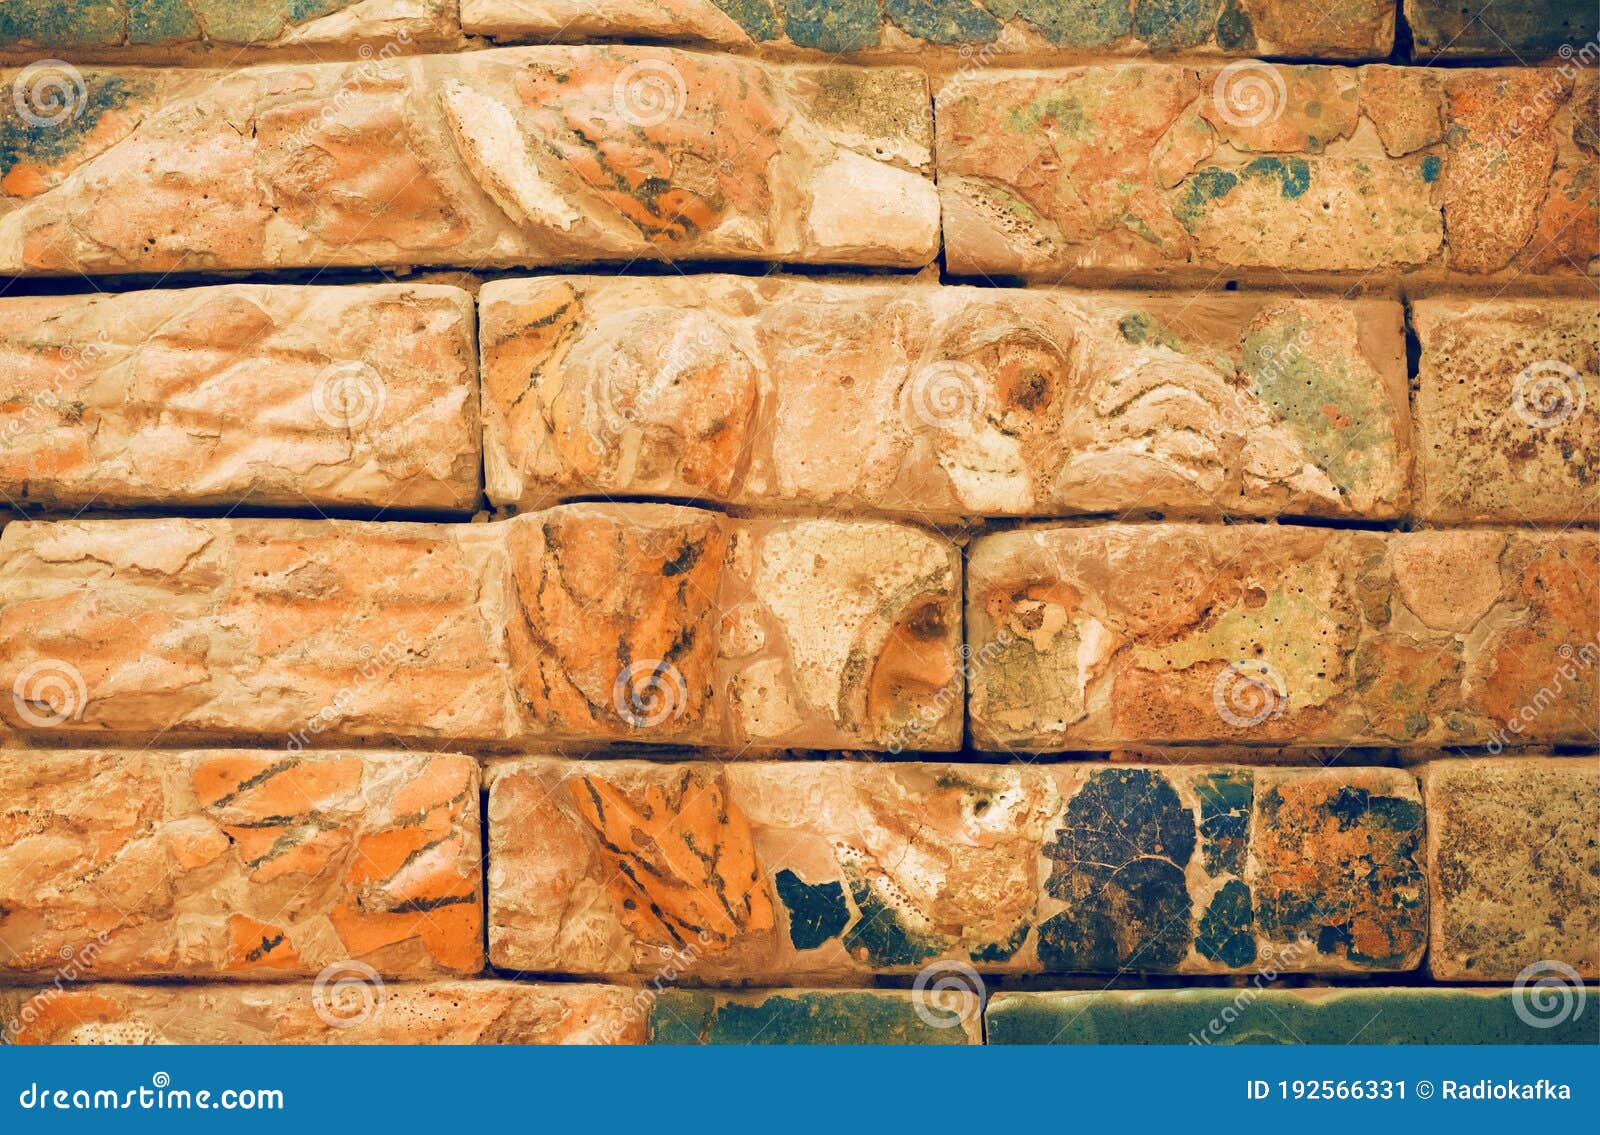 lion-from-the-ishtar-gate-royalty-free-stock-photography